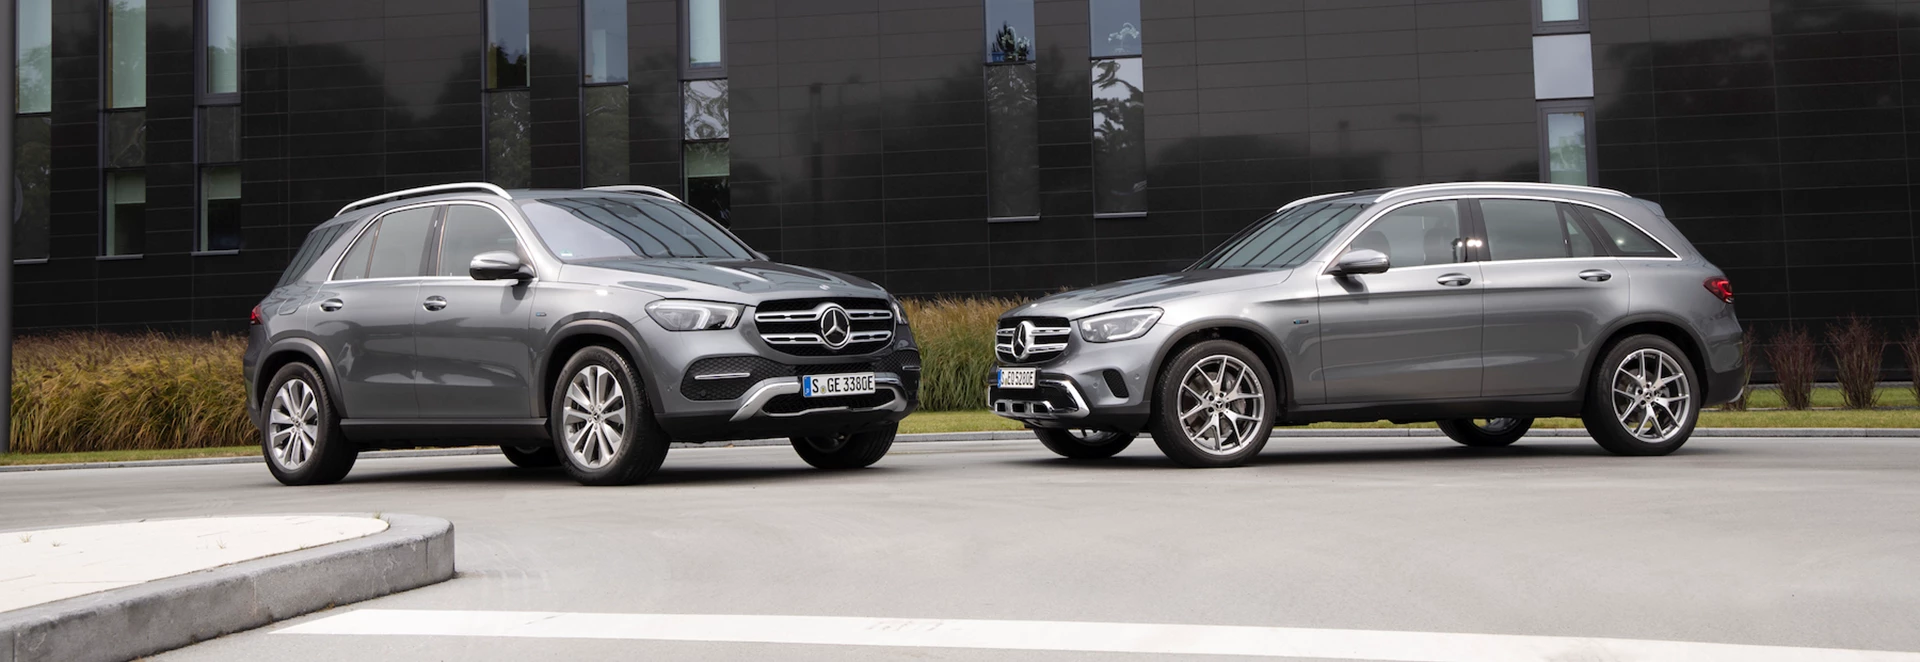 New plug-in hybrid Mercedes-Benz SUVs now on sale